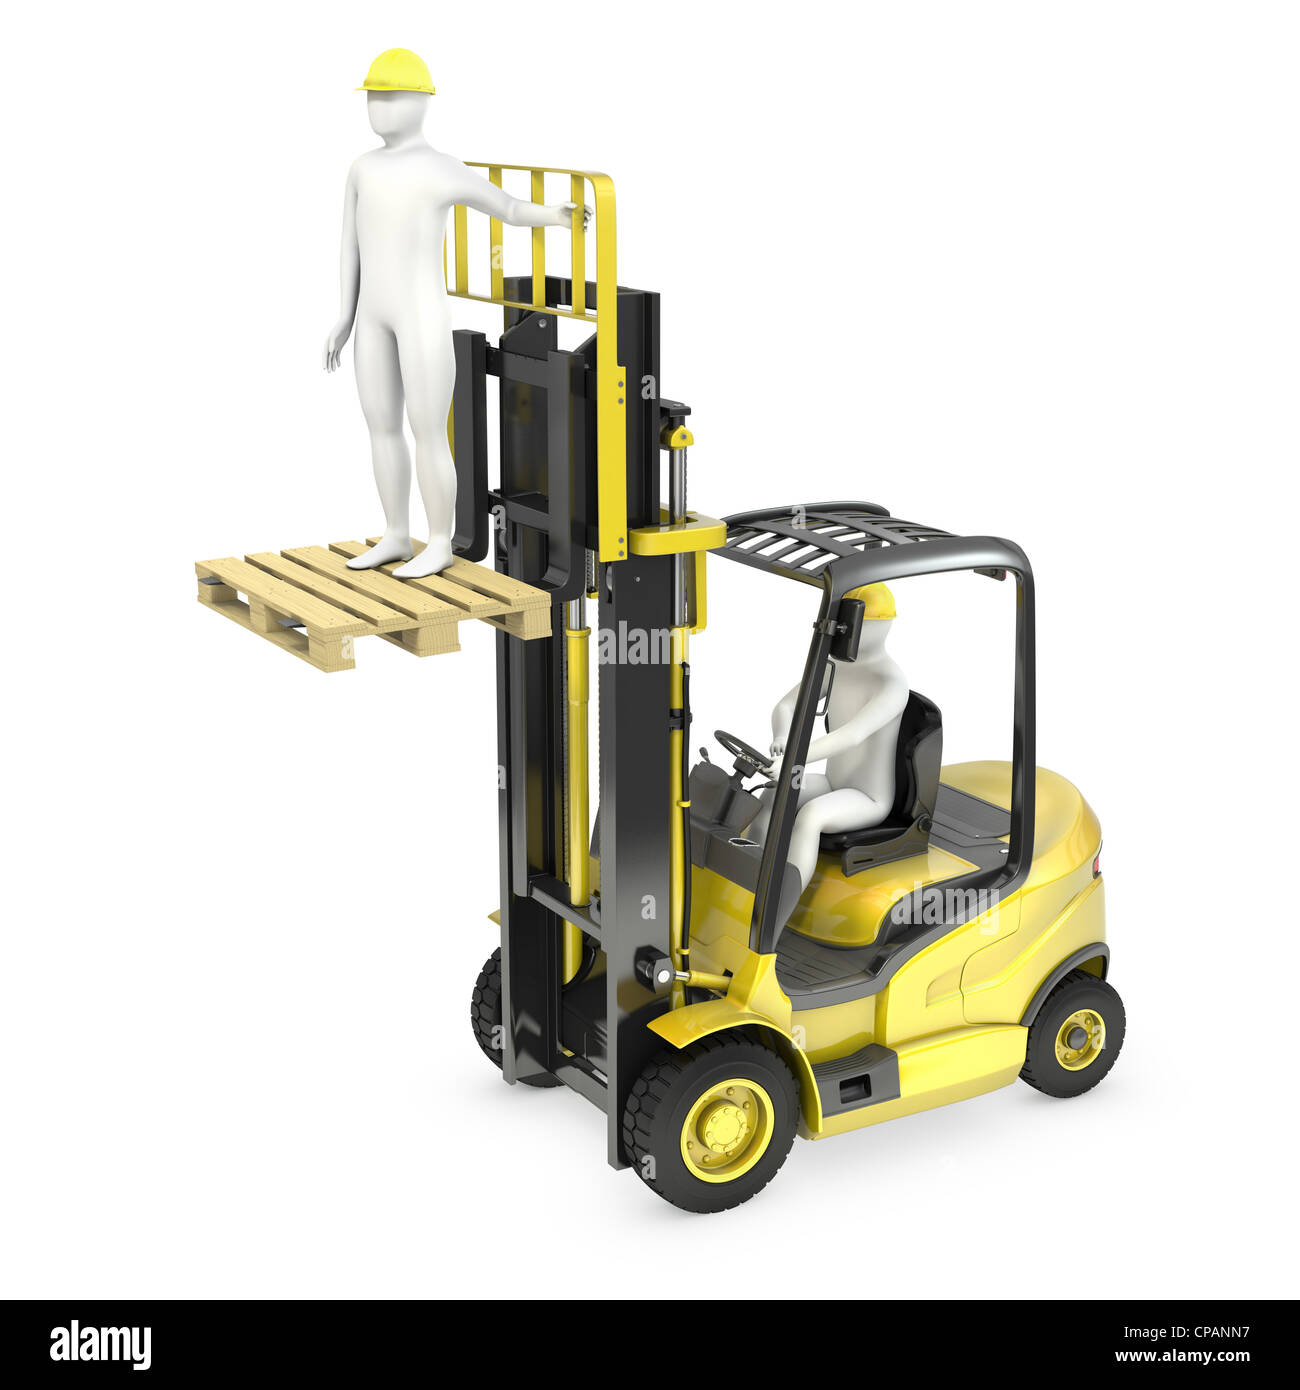 Abstract white man in a fork lift truck, lifting other worker on a fork, isolated on white background Stock Photo